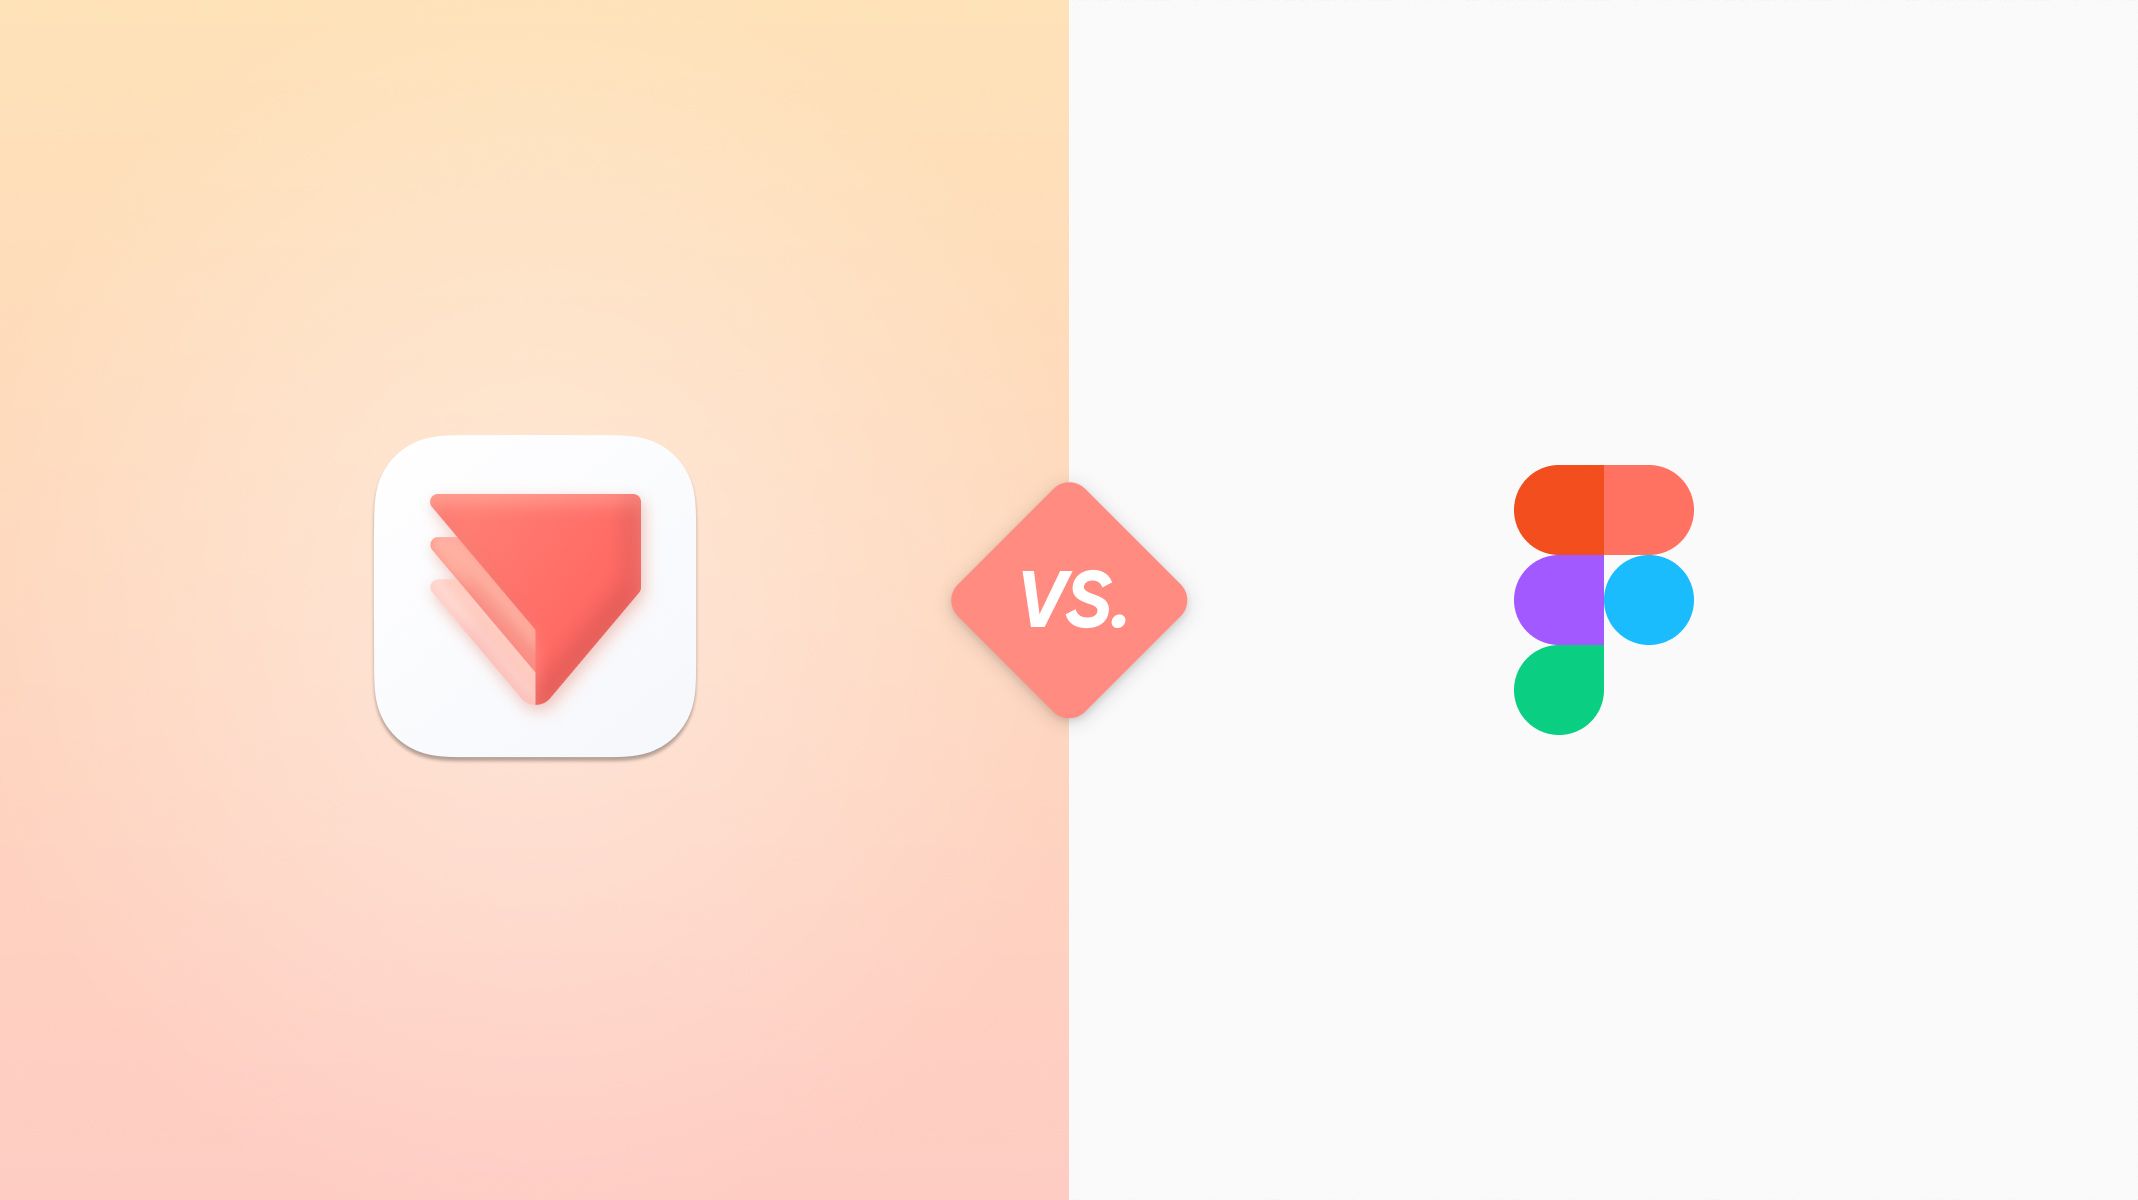 ProtoPie vs. Figma, which tool is better for interactive prototyping?